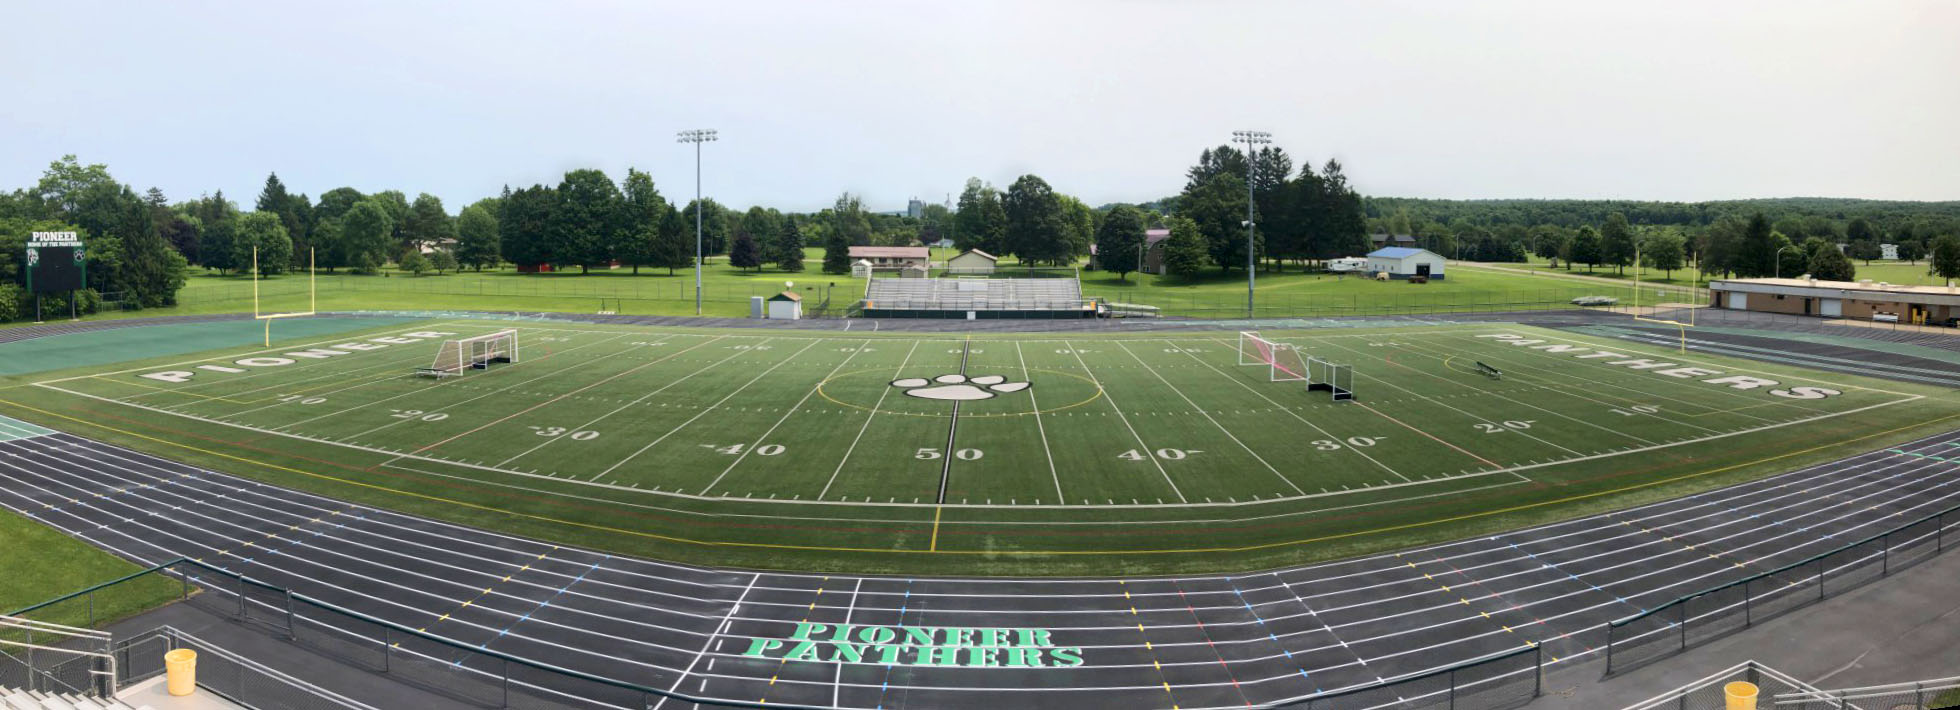 full view image of the football Field